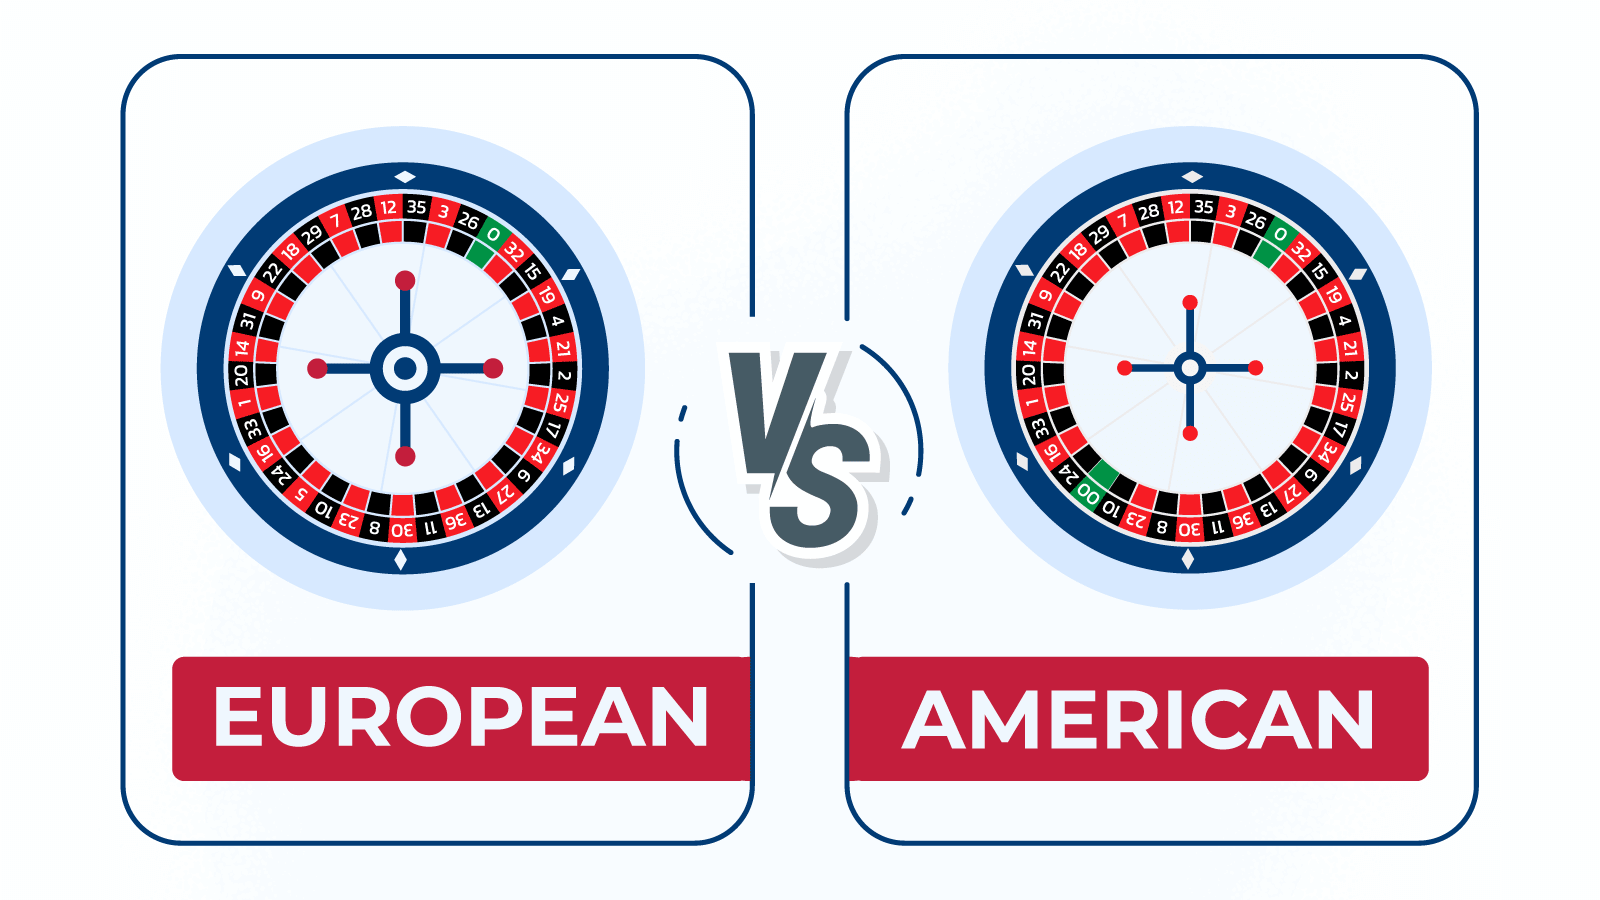 Learn the differences between American and European Roulette